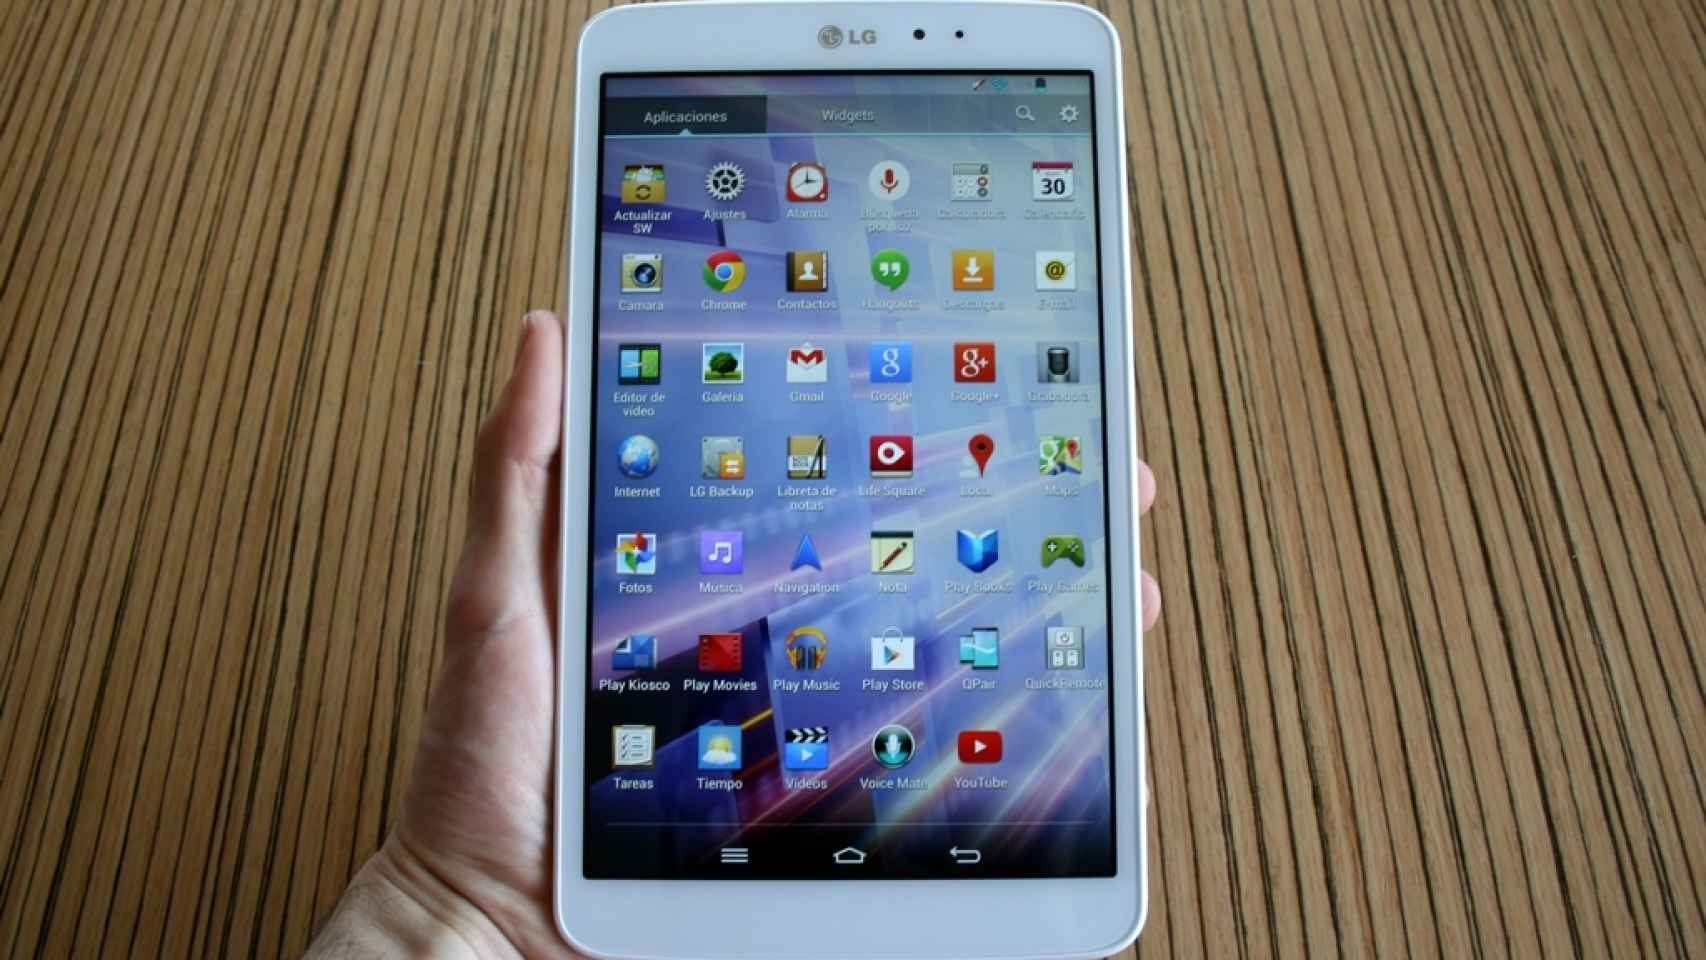 LG G Pad 8.3 se actualiza a Android 4.4.2 KitKat